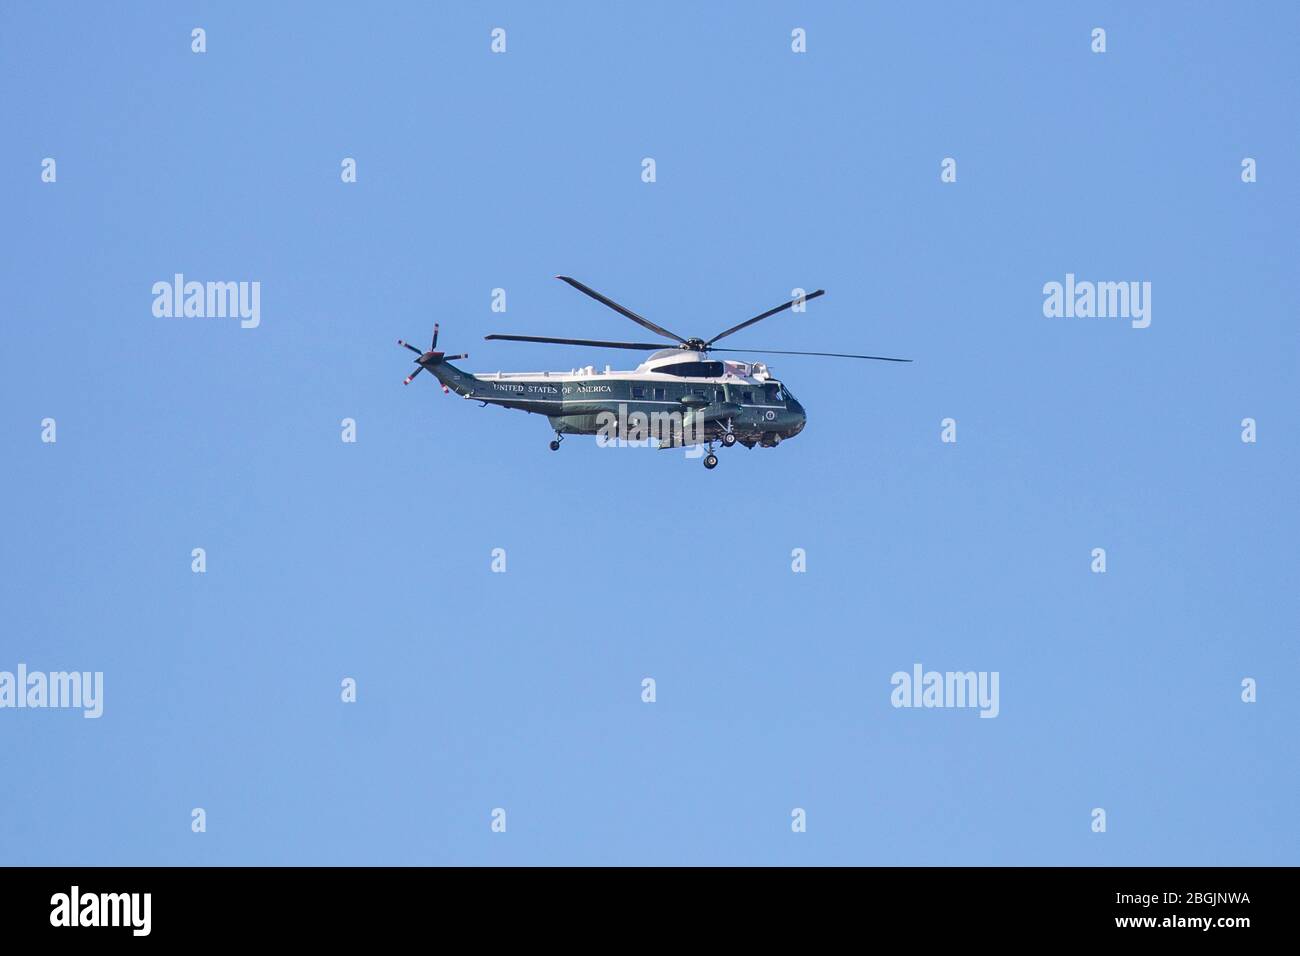 San Diego, United States. 18th Sep, 2019. Marine One helicopter, with President Donald Trump aboard, prepares to land at Marine Corps Air Station Miramar, Wednesday, September 18, 2019, in San Diego, Calif. (Brandon Sloter/image of Sport) Photo via Credit: Newscom/Alamy Live News Stock Photo